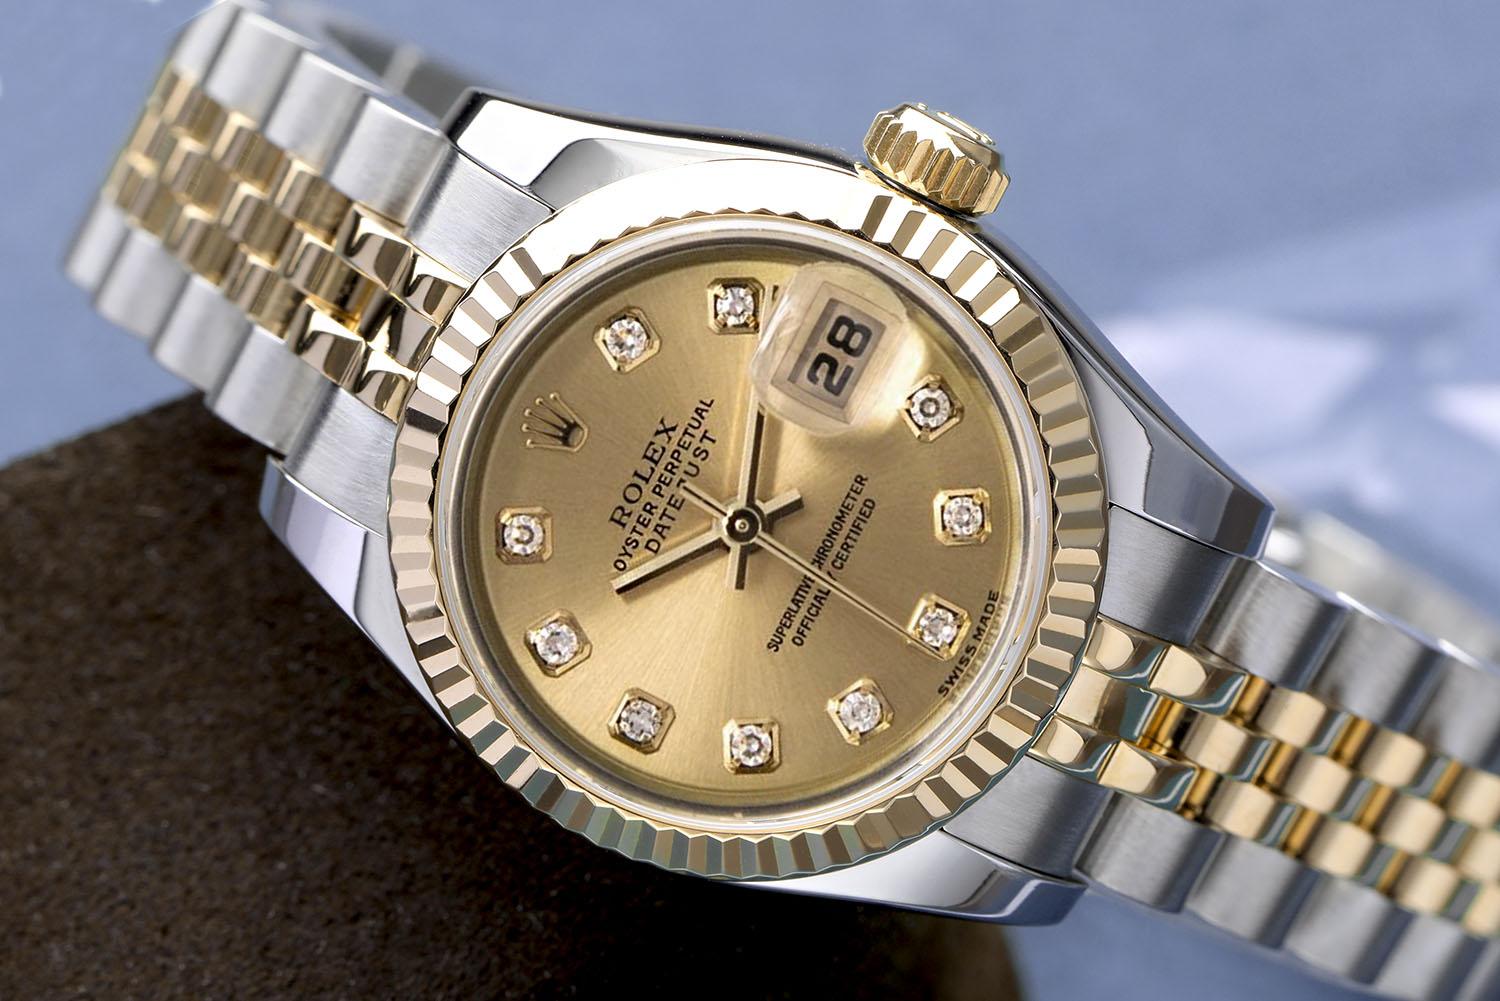 Rolex Lady-Datejust 179173 Steel/Yellow Gold Watch Champagne Diamond Dial In Excellent Condition For Sale In New York, NY